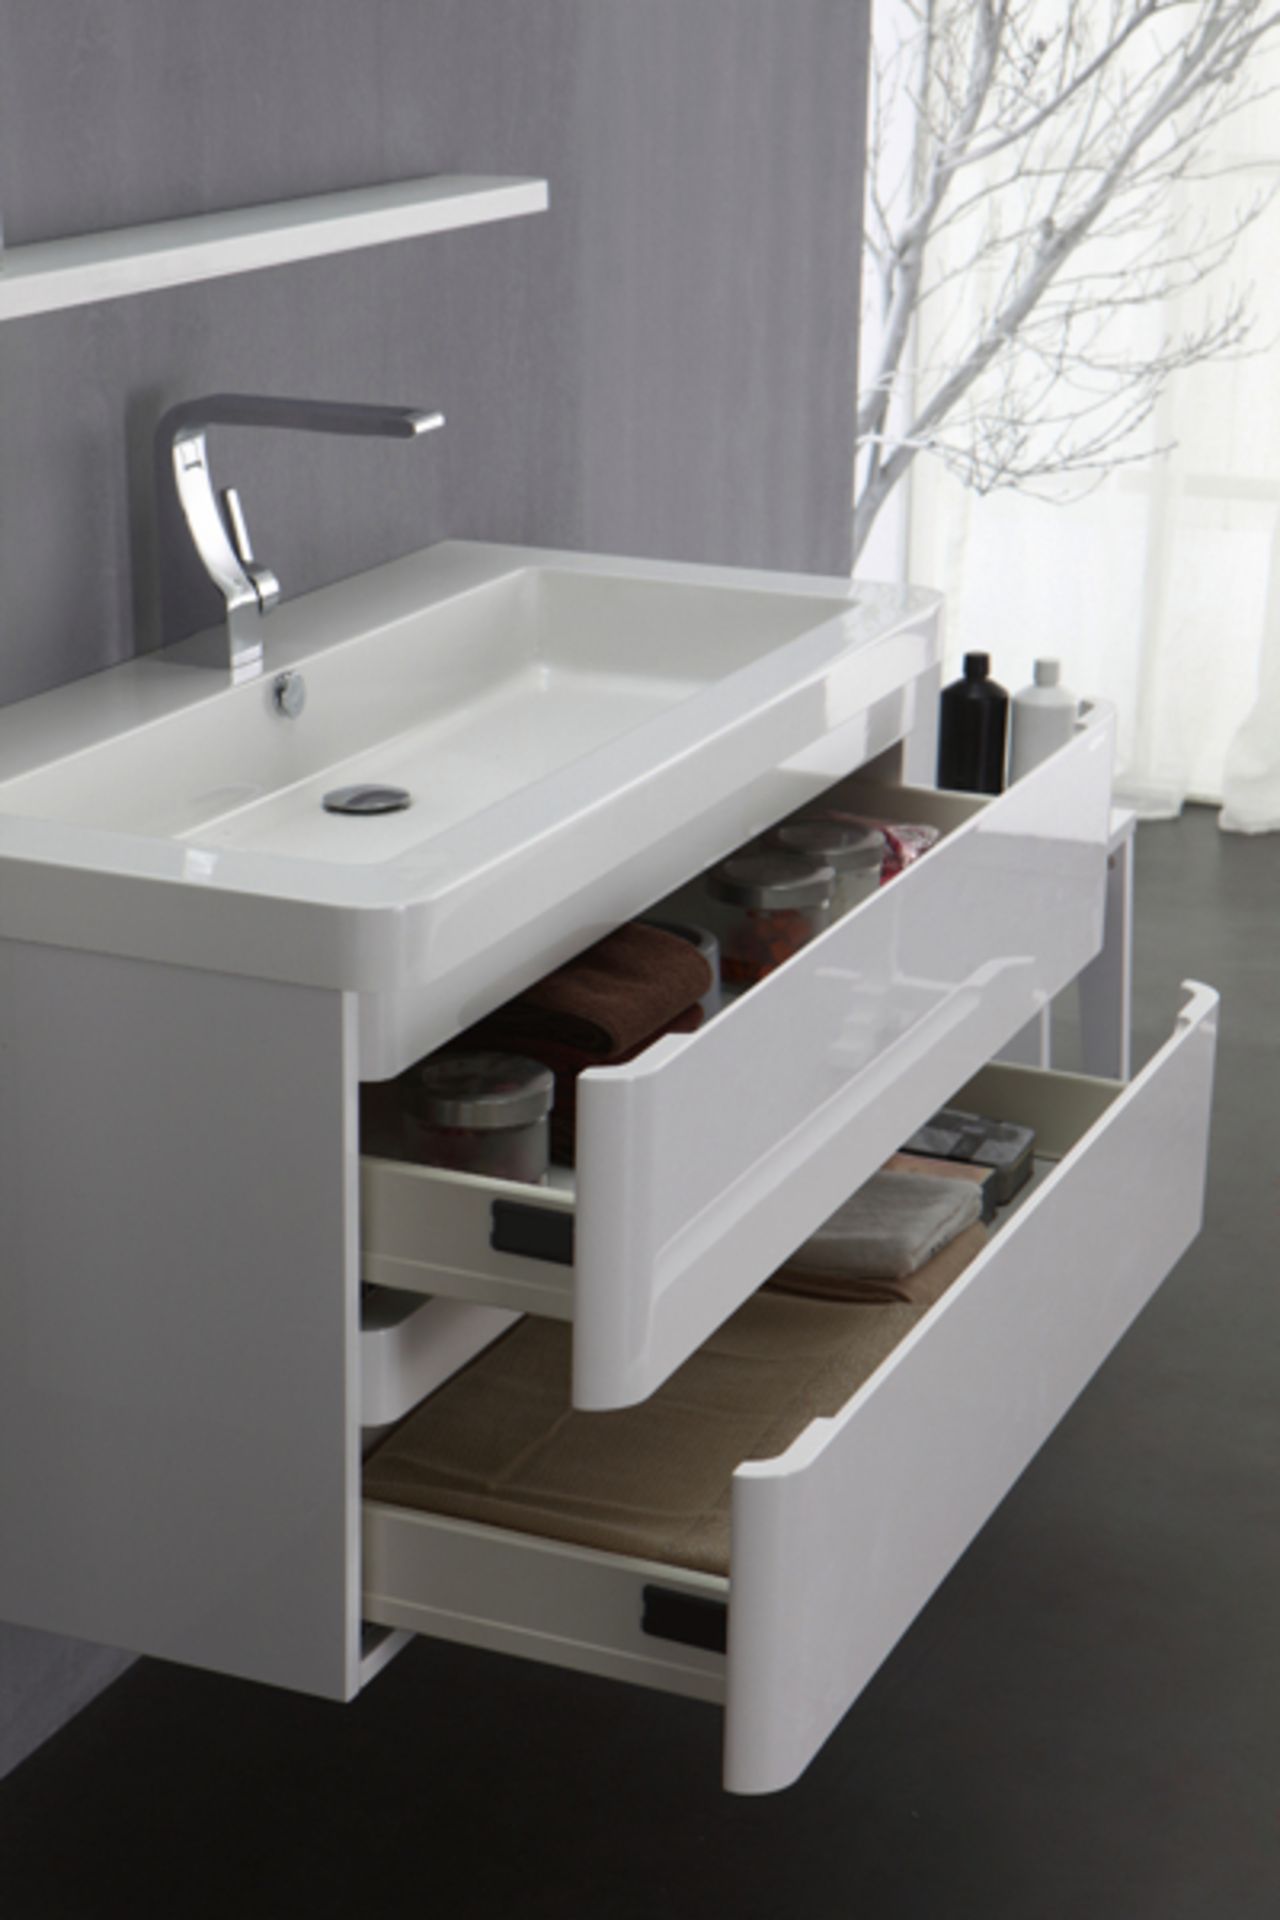 1 x MarbleTECH Urban Basin and Base Unit 100 - A-Grade - Ref:ABS21-100 & AWS31-100 - CL170 - - Image 3 of 3